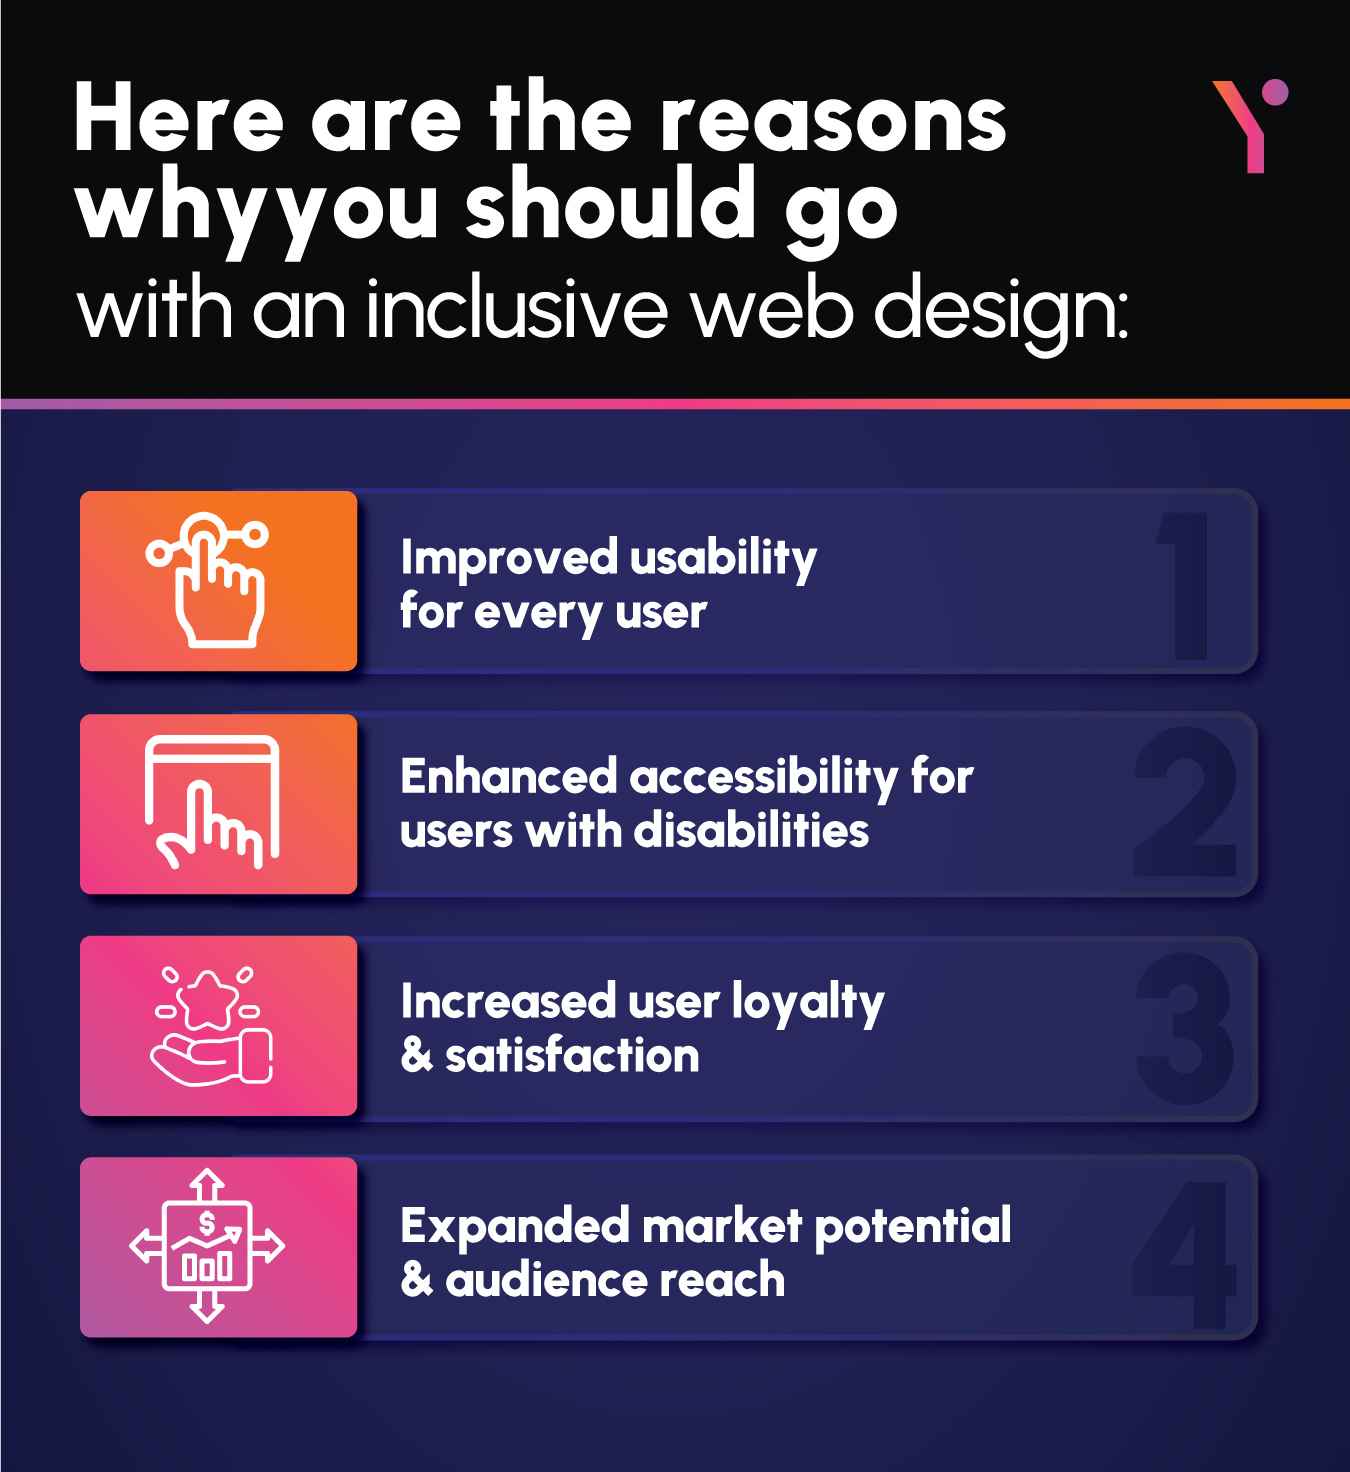 Key pointers of Inclusive Web Design in infographic form